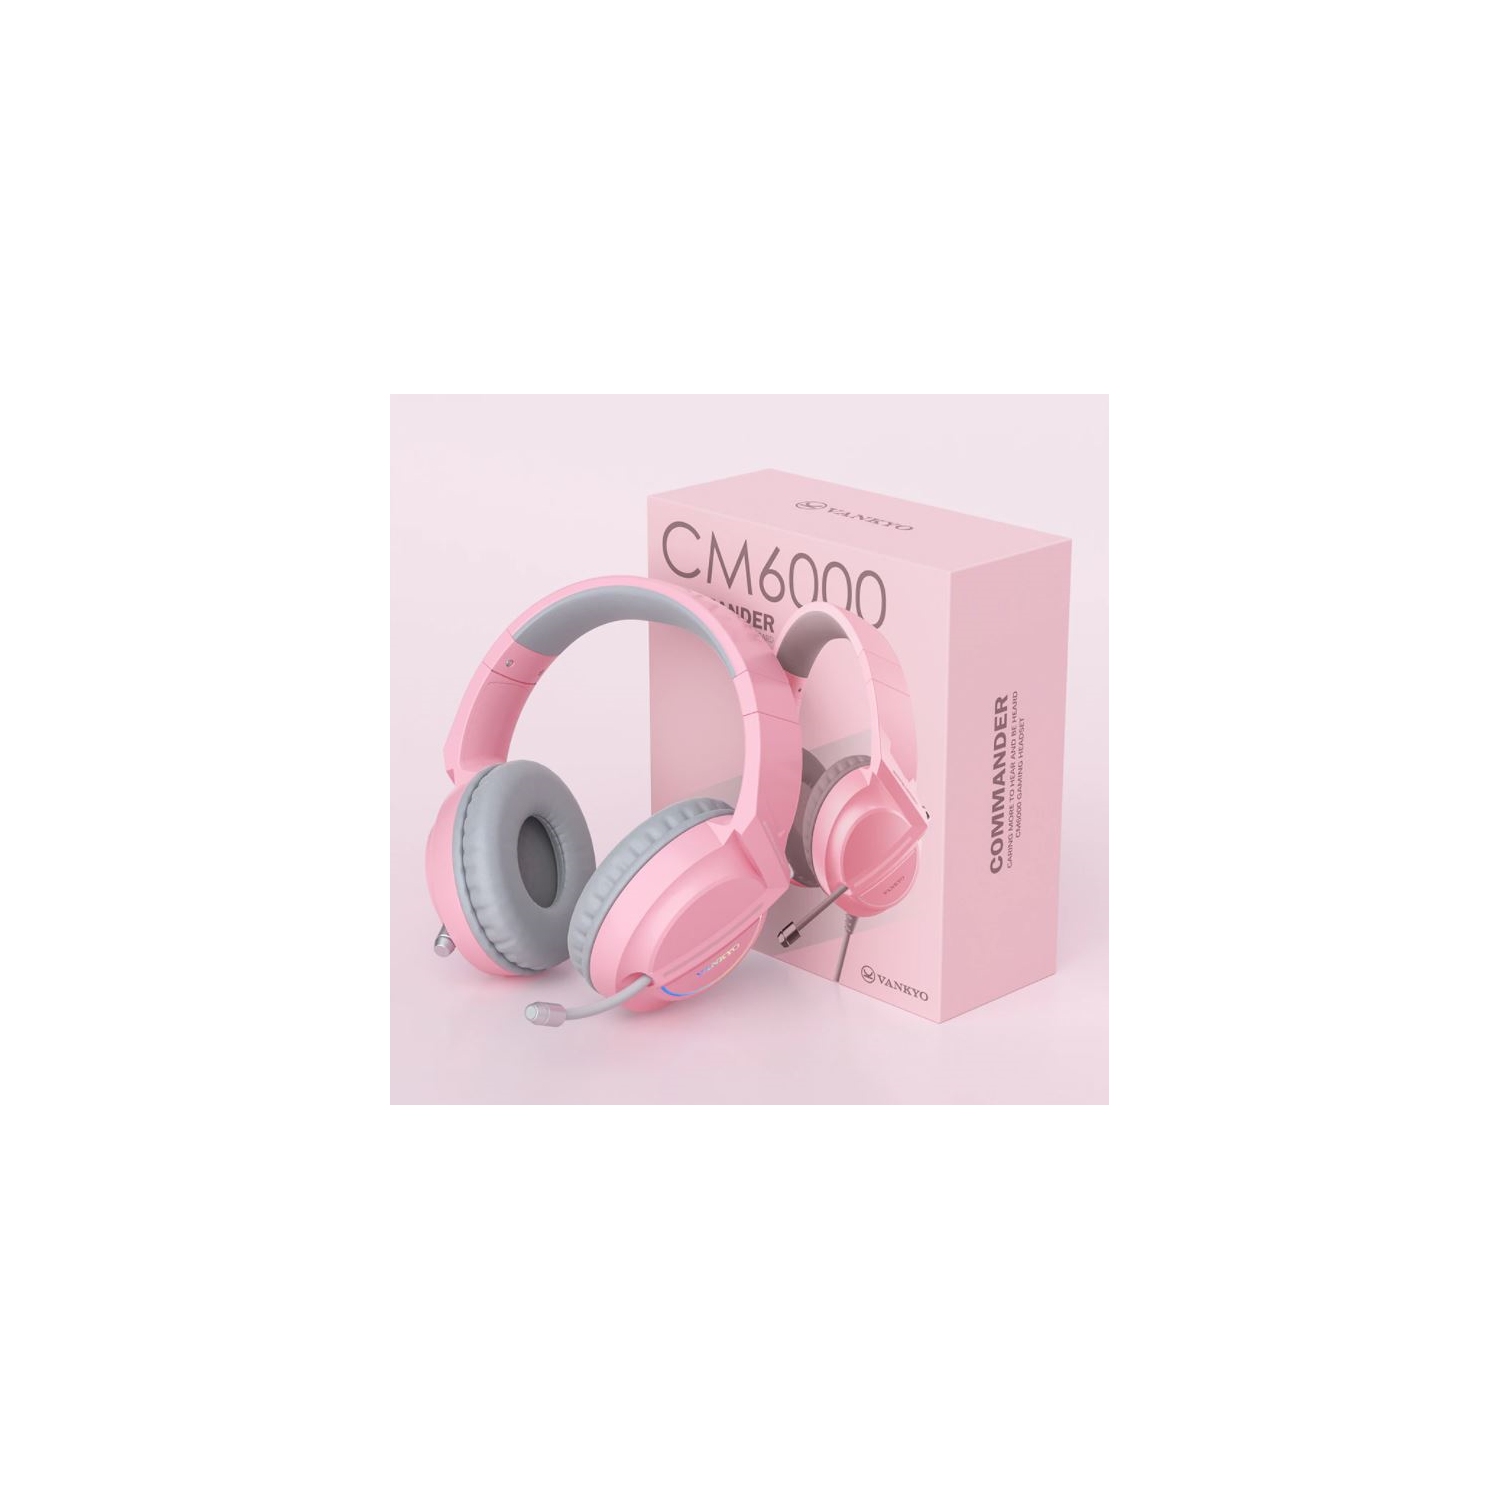 VANKYO CM6000 Gaming Headset, PC Gaming Headphone with Microphone, 7.1 Surround Sound, Noise Isolation, Comfortable Earmuffs, LED Lights, Pink